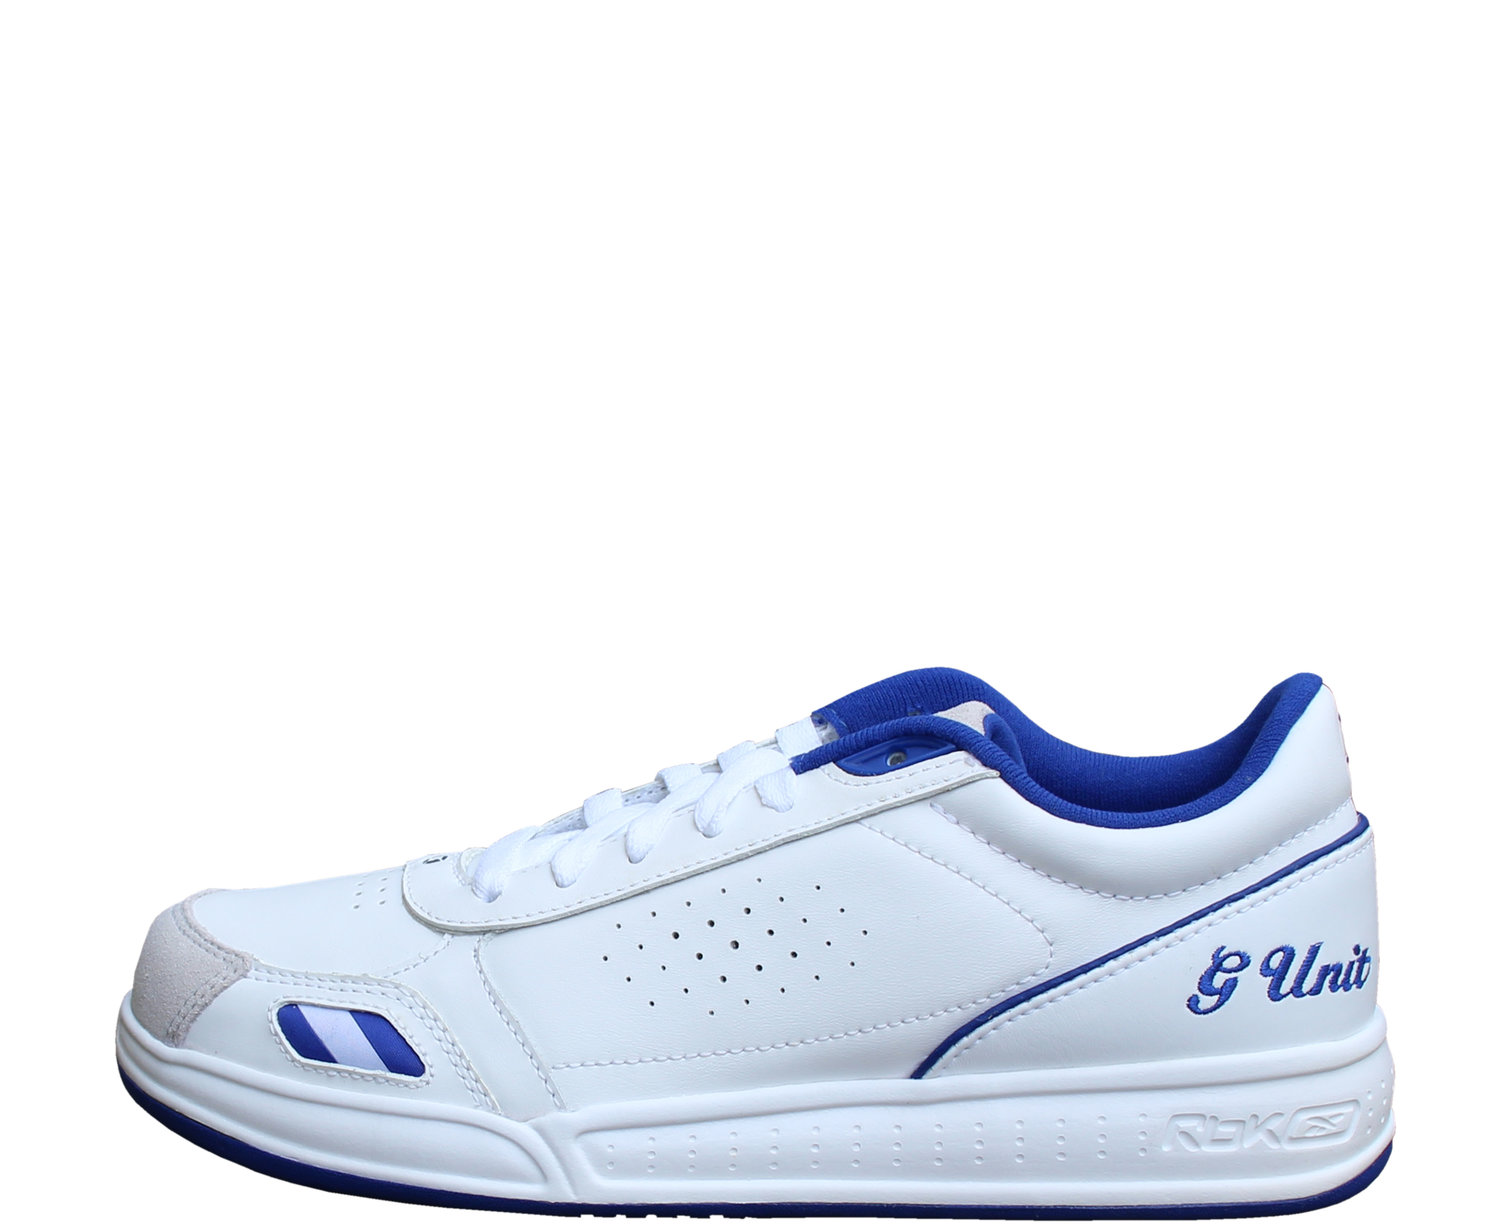 Kids Reebok G III White / Royal DS Roots